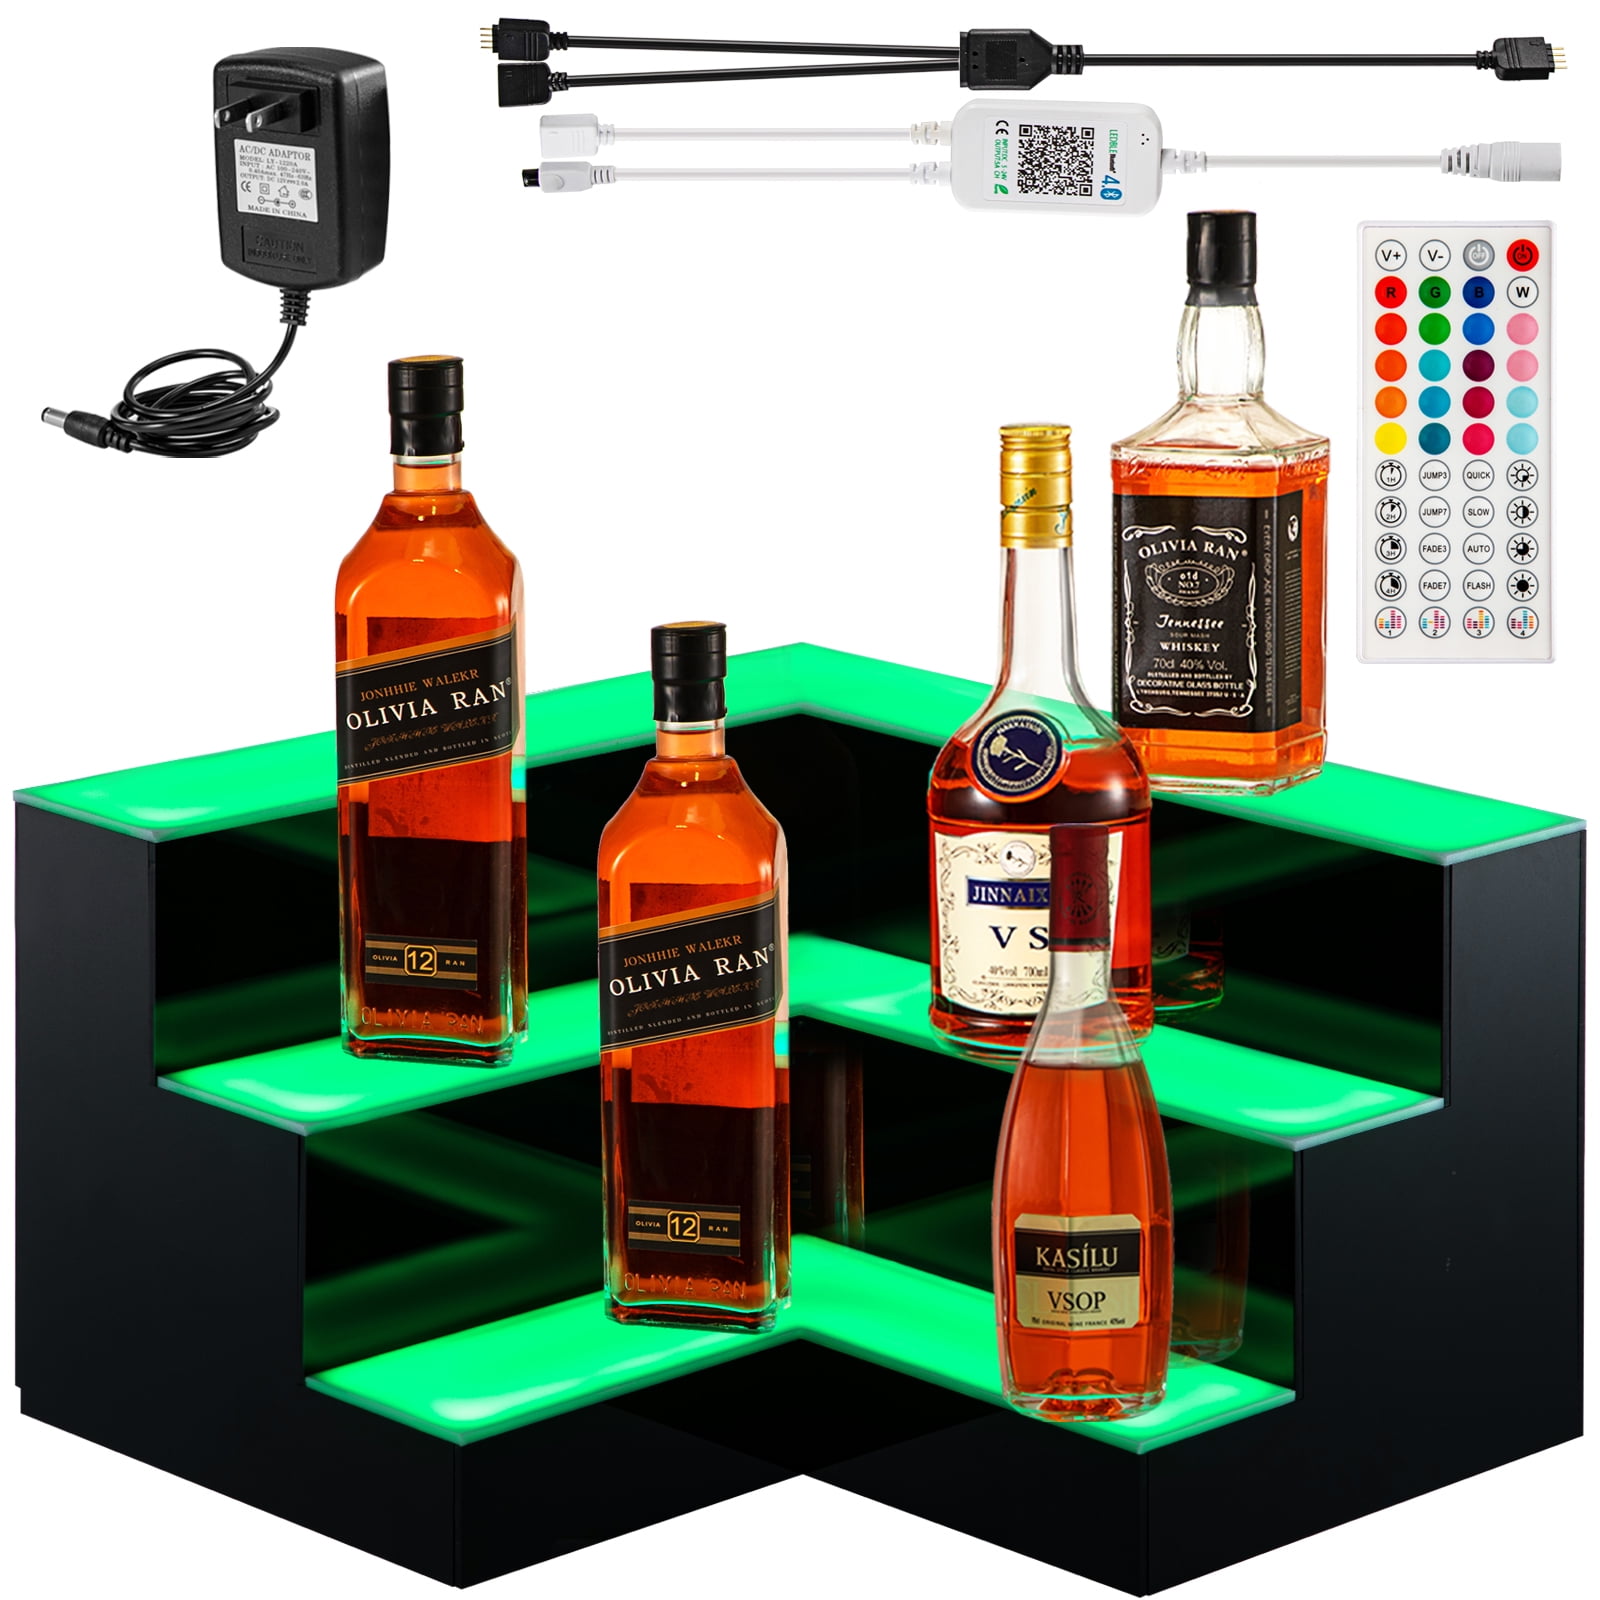 SET OF 3 ACRYLIC WALL MOUNTED  COLOR LED LIQUOR BOTTLE DISPLAY REMOTE control 